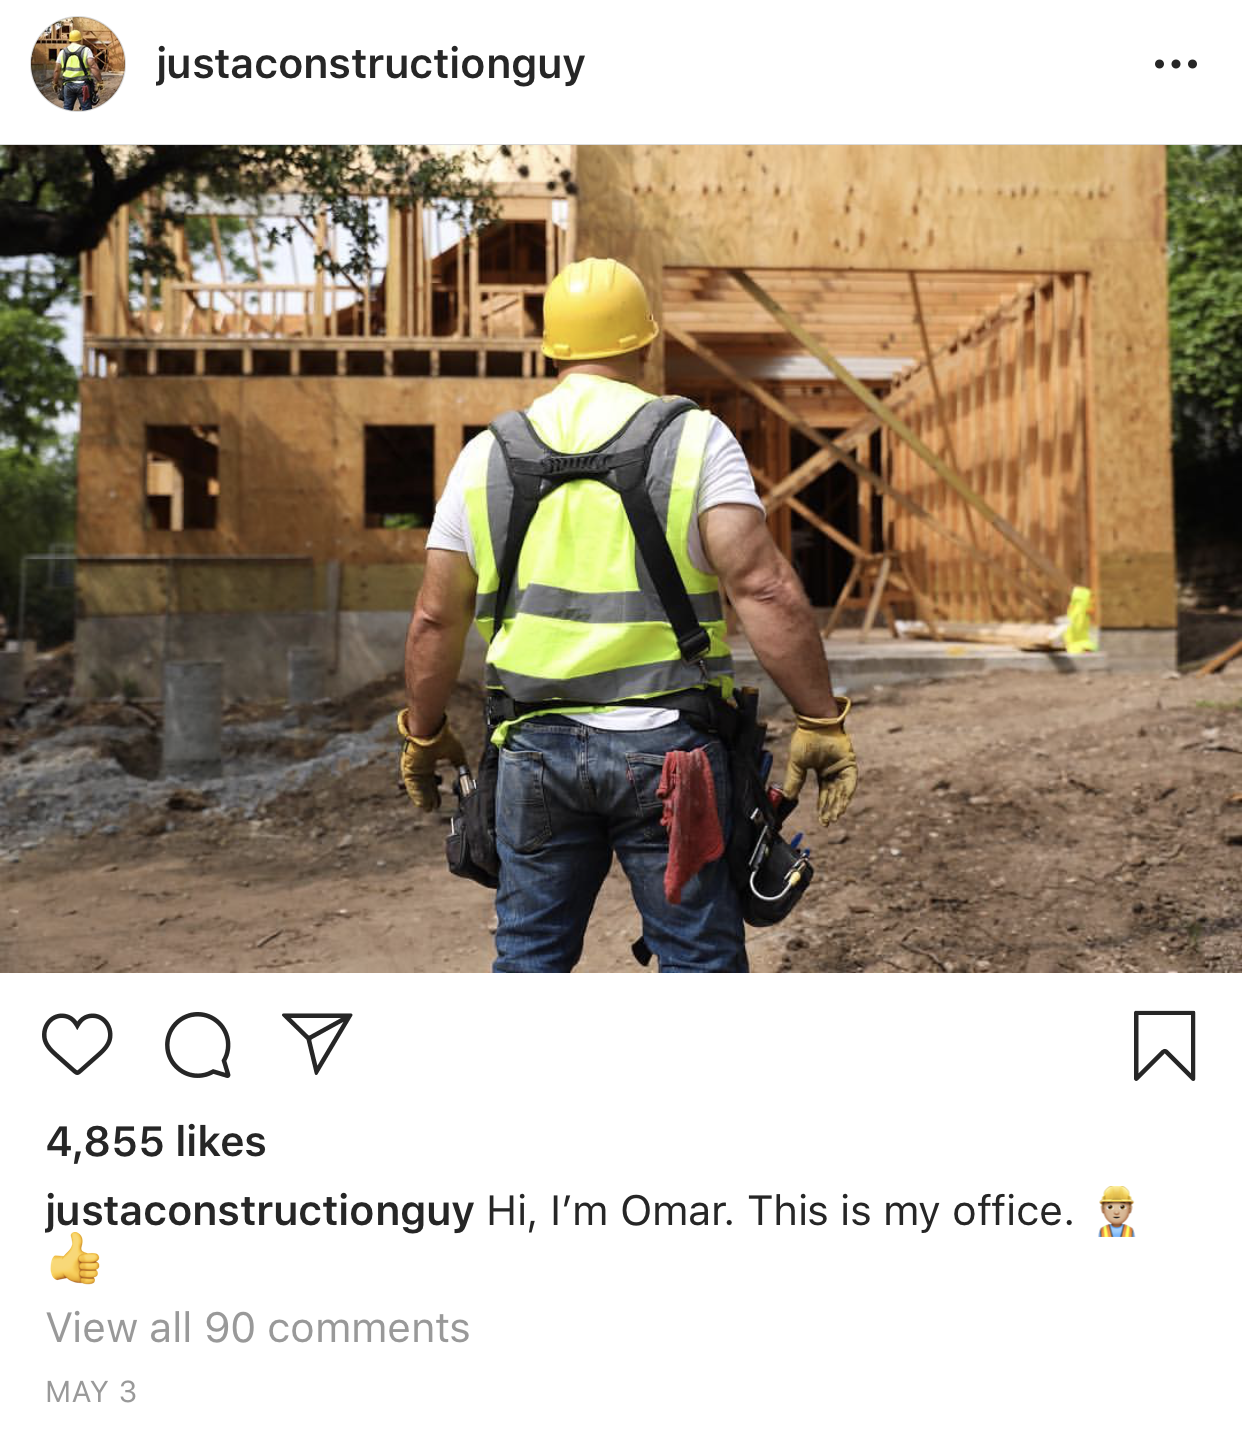 We can't get enough of JustAConstructionGuy on Instagram